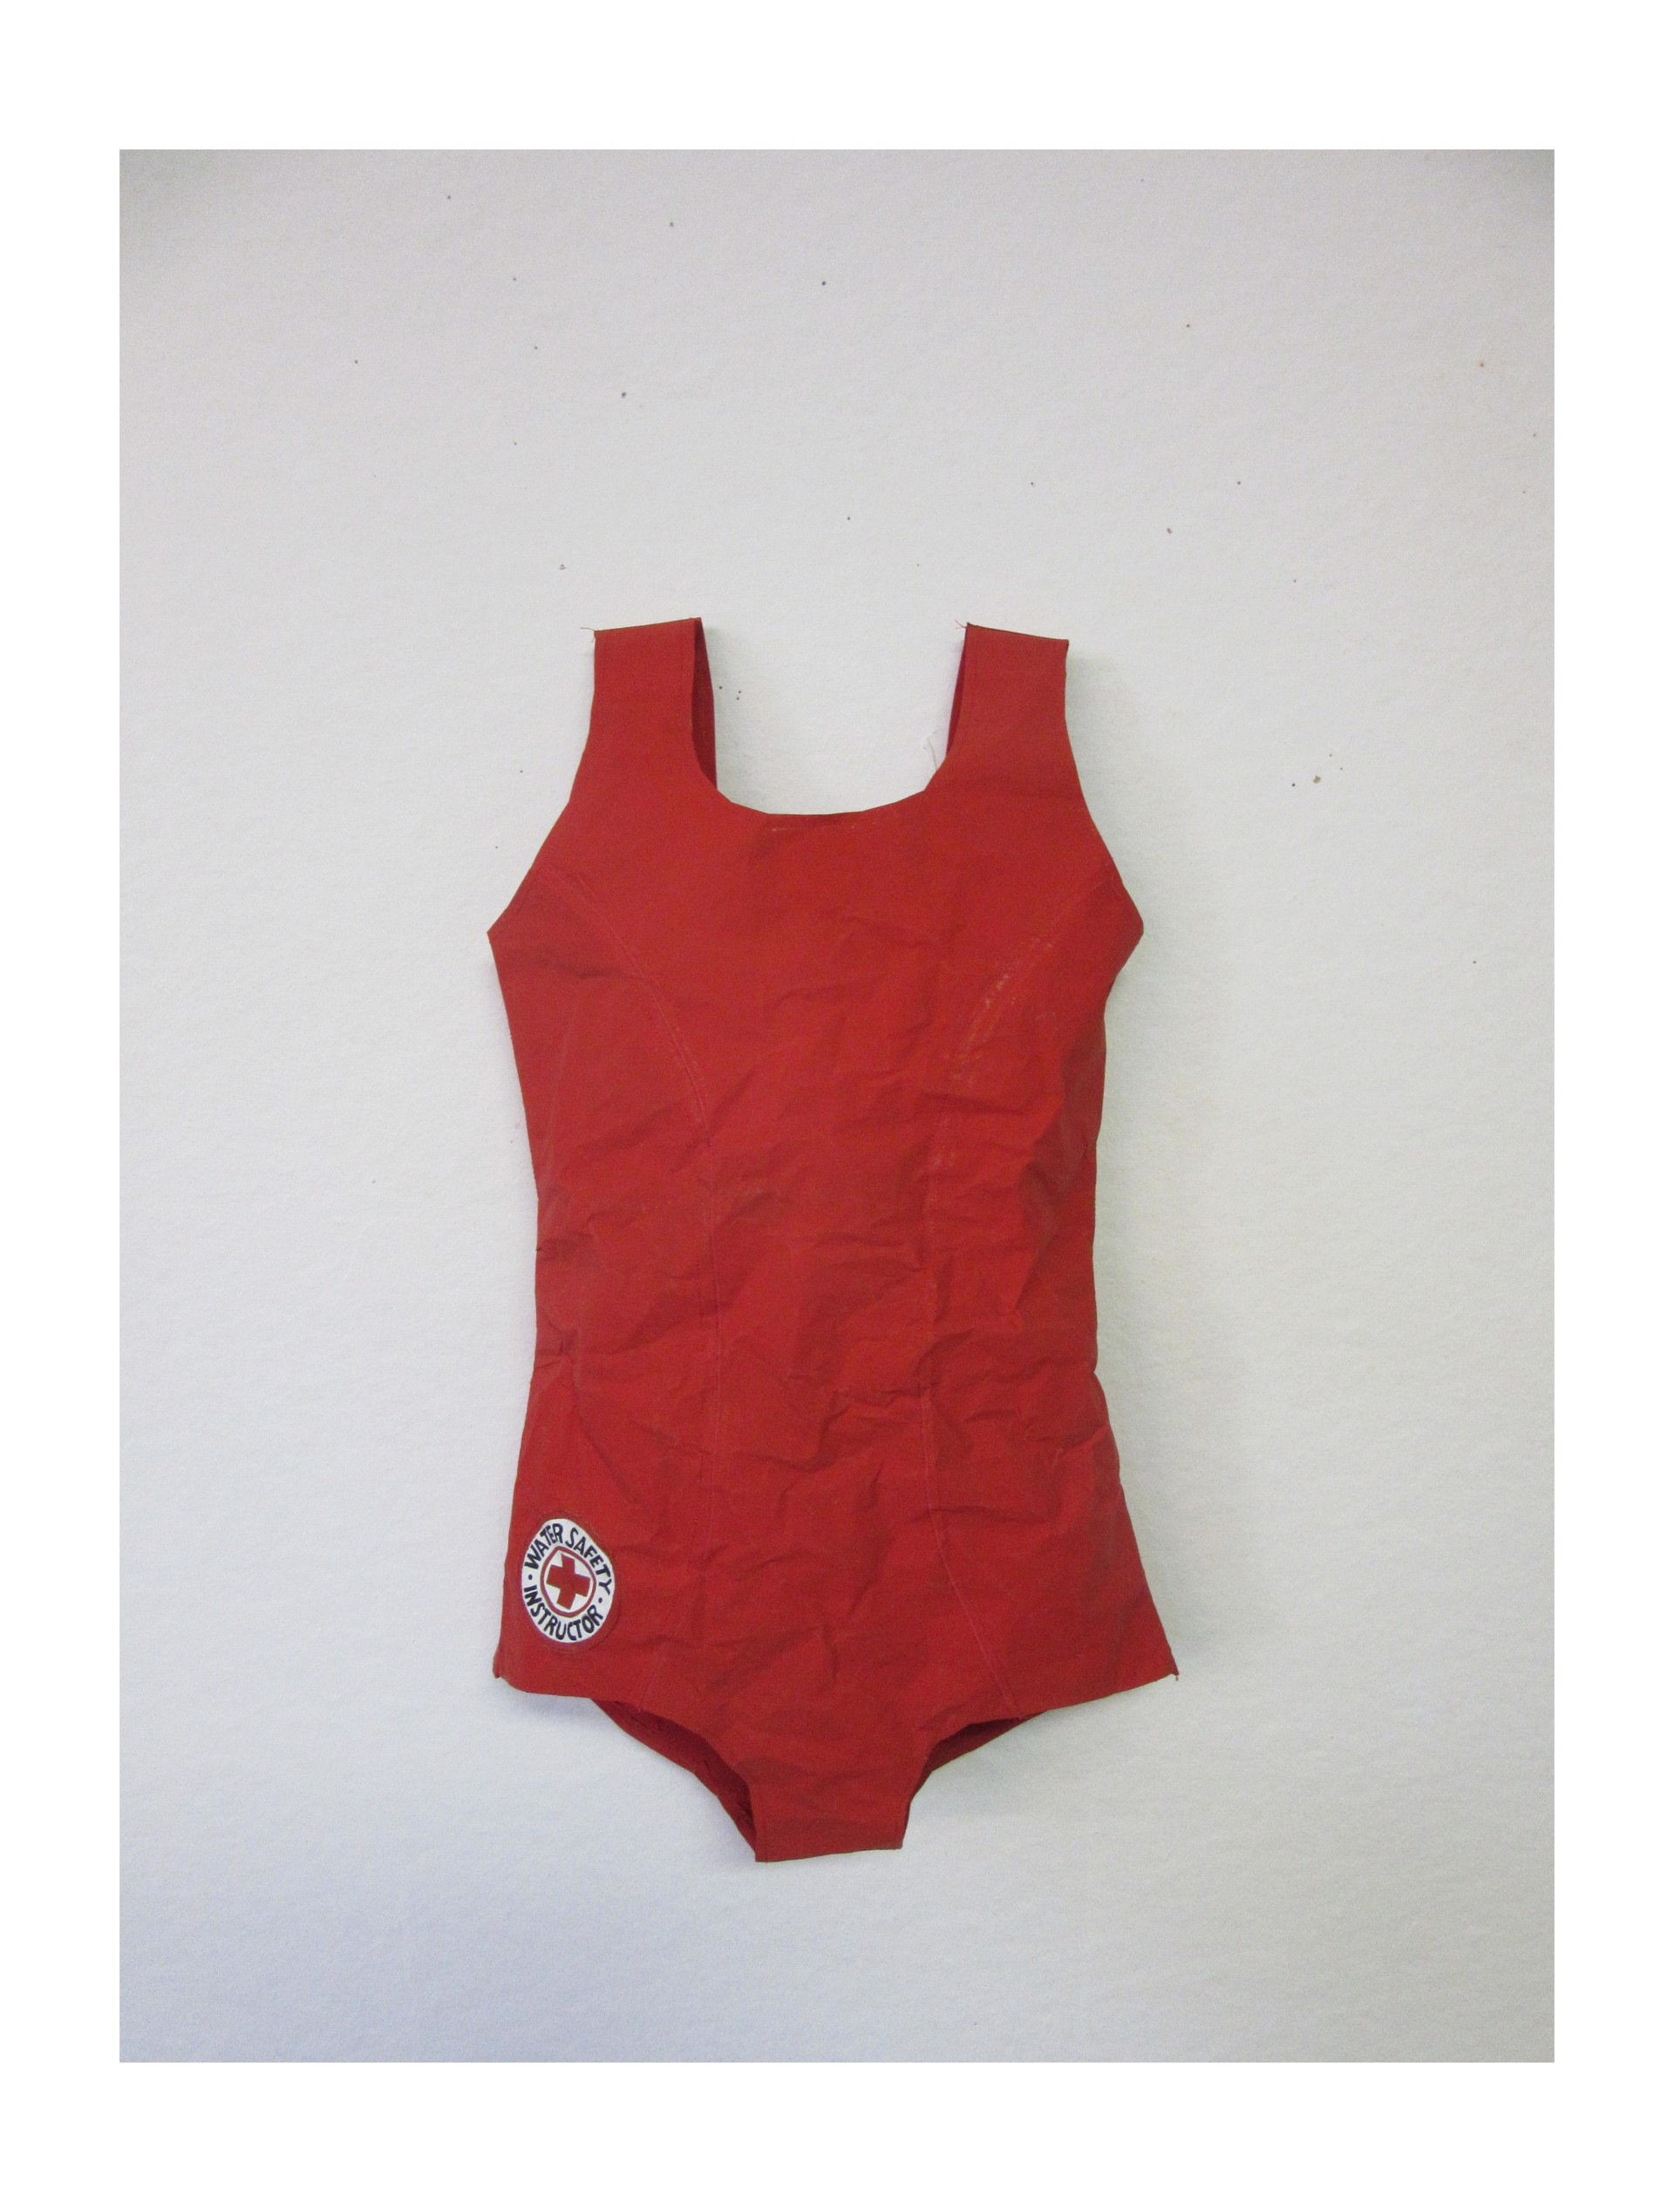 Water Safety Instructor Swimsuit by PHRANC